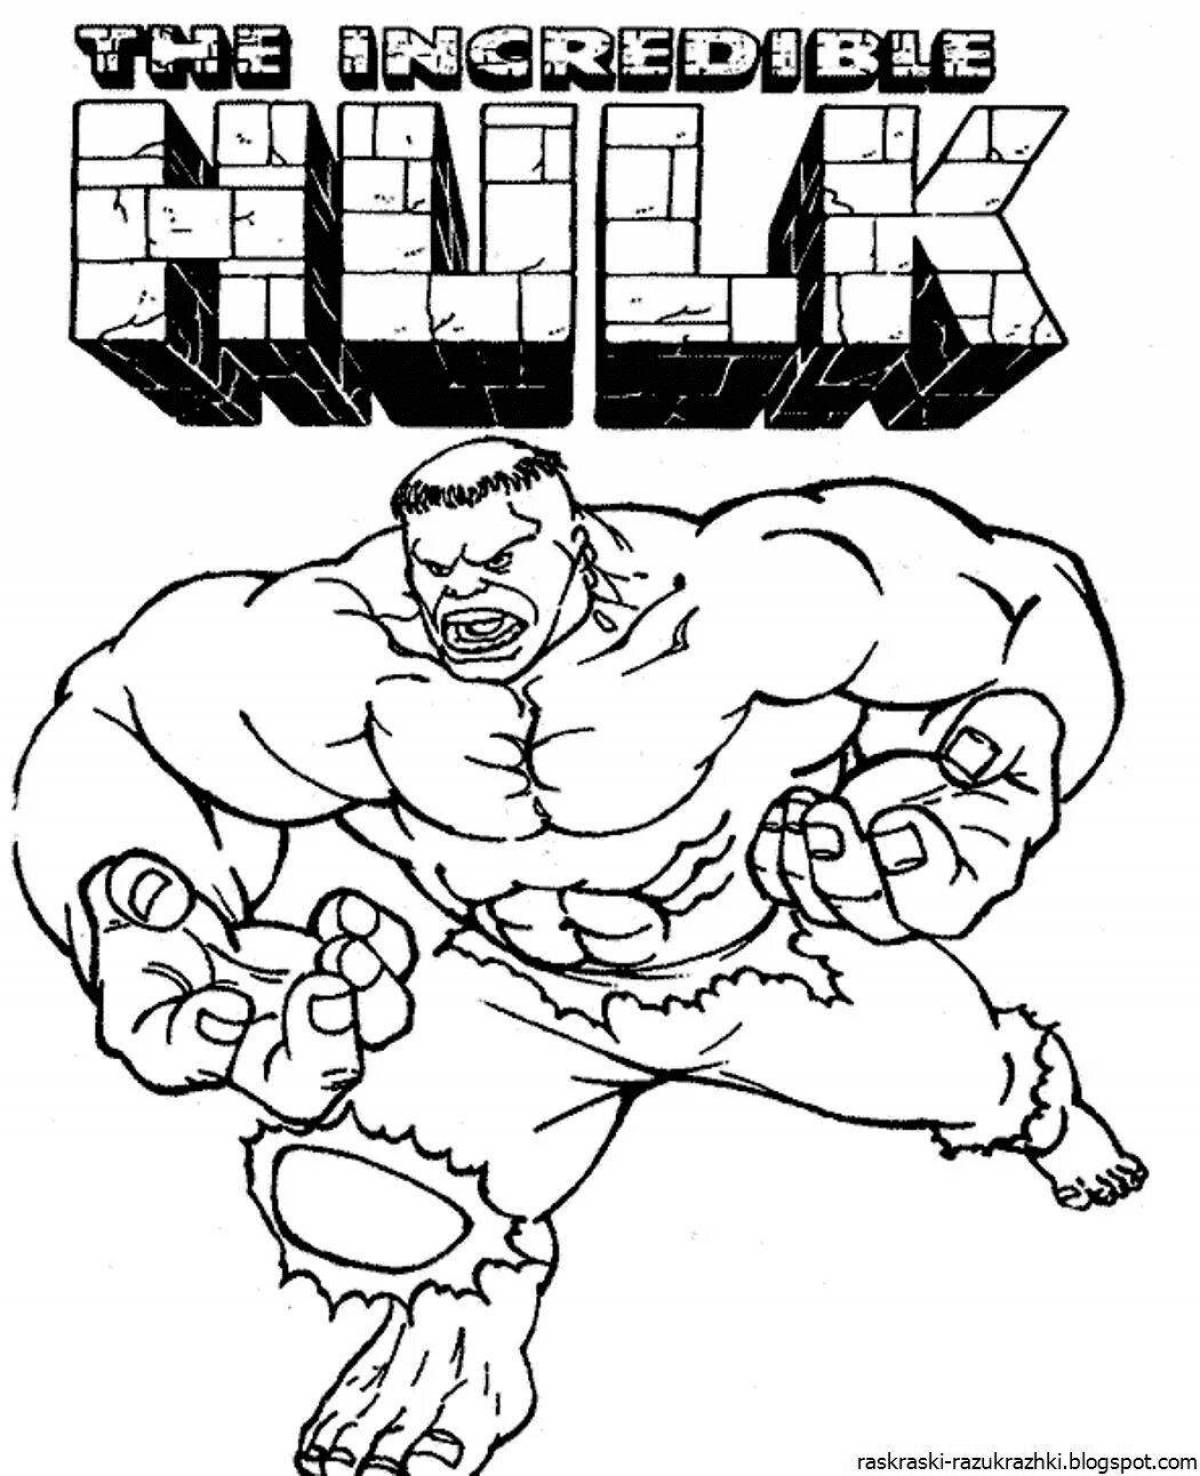 Living Hulk coloring book for children 6-7 years old